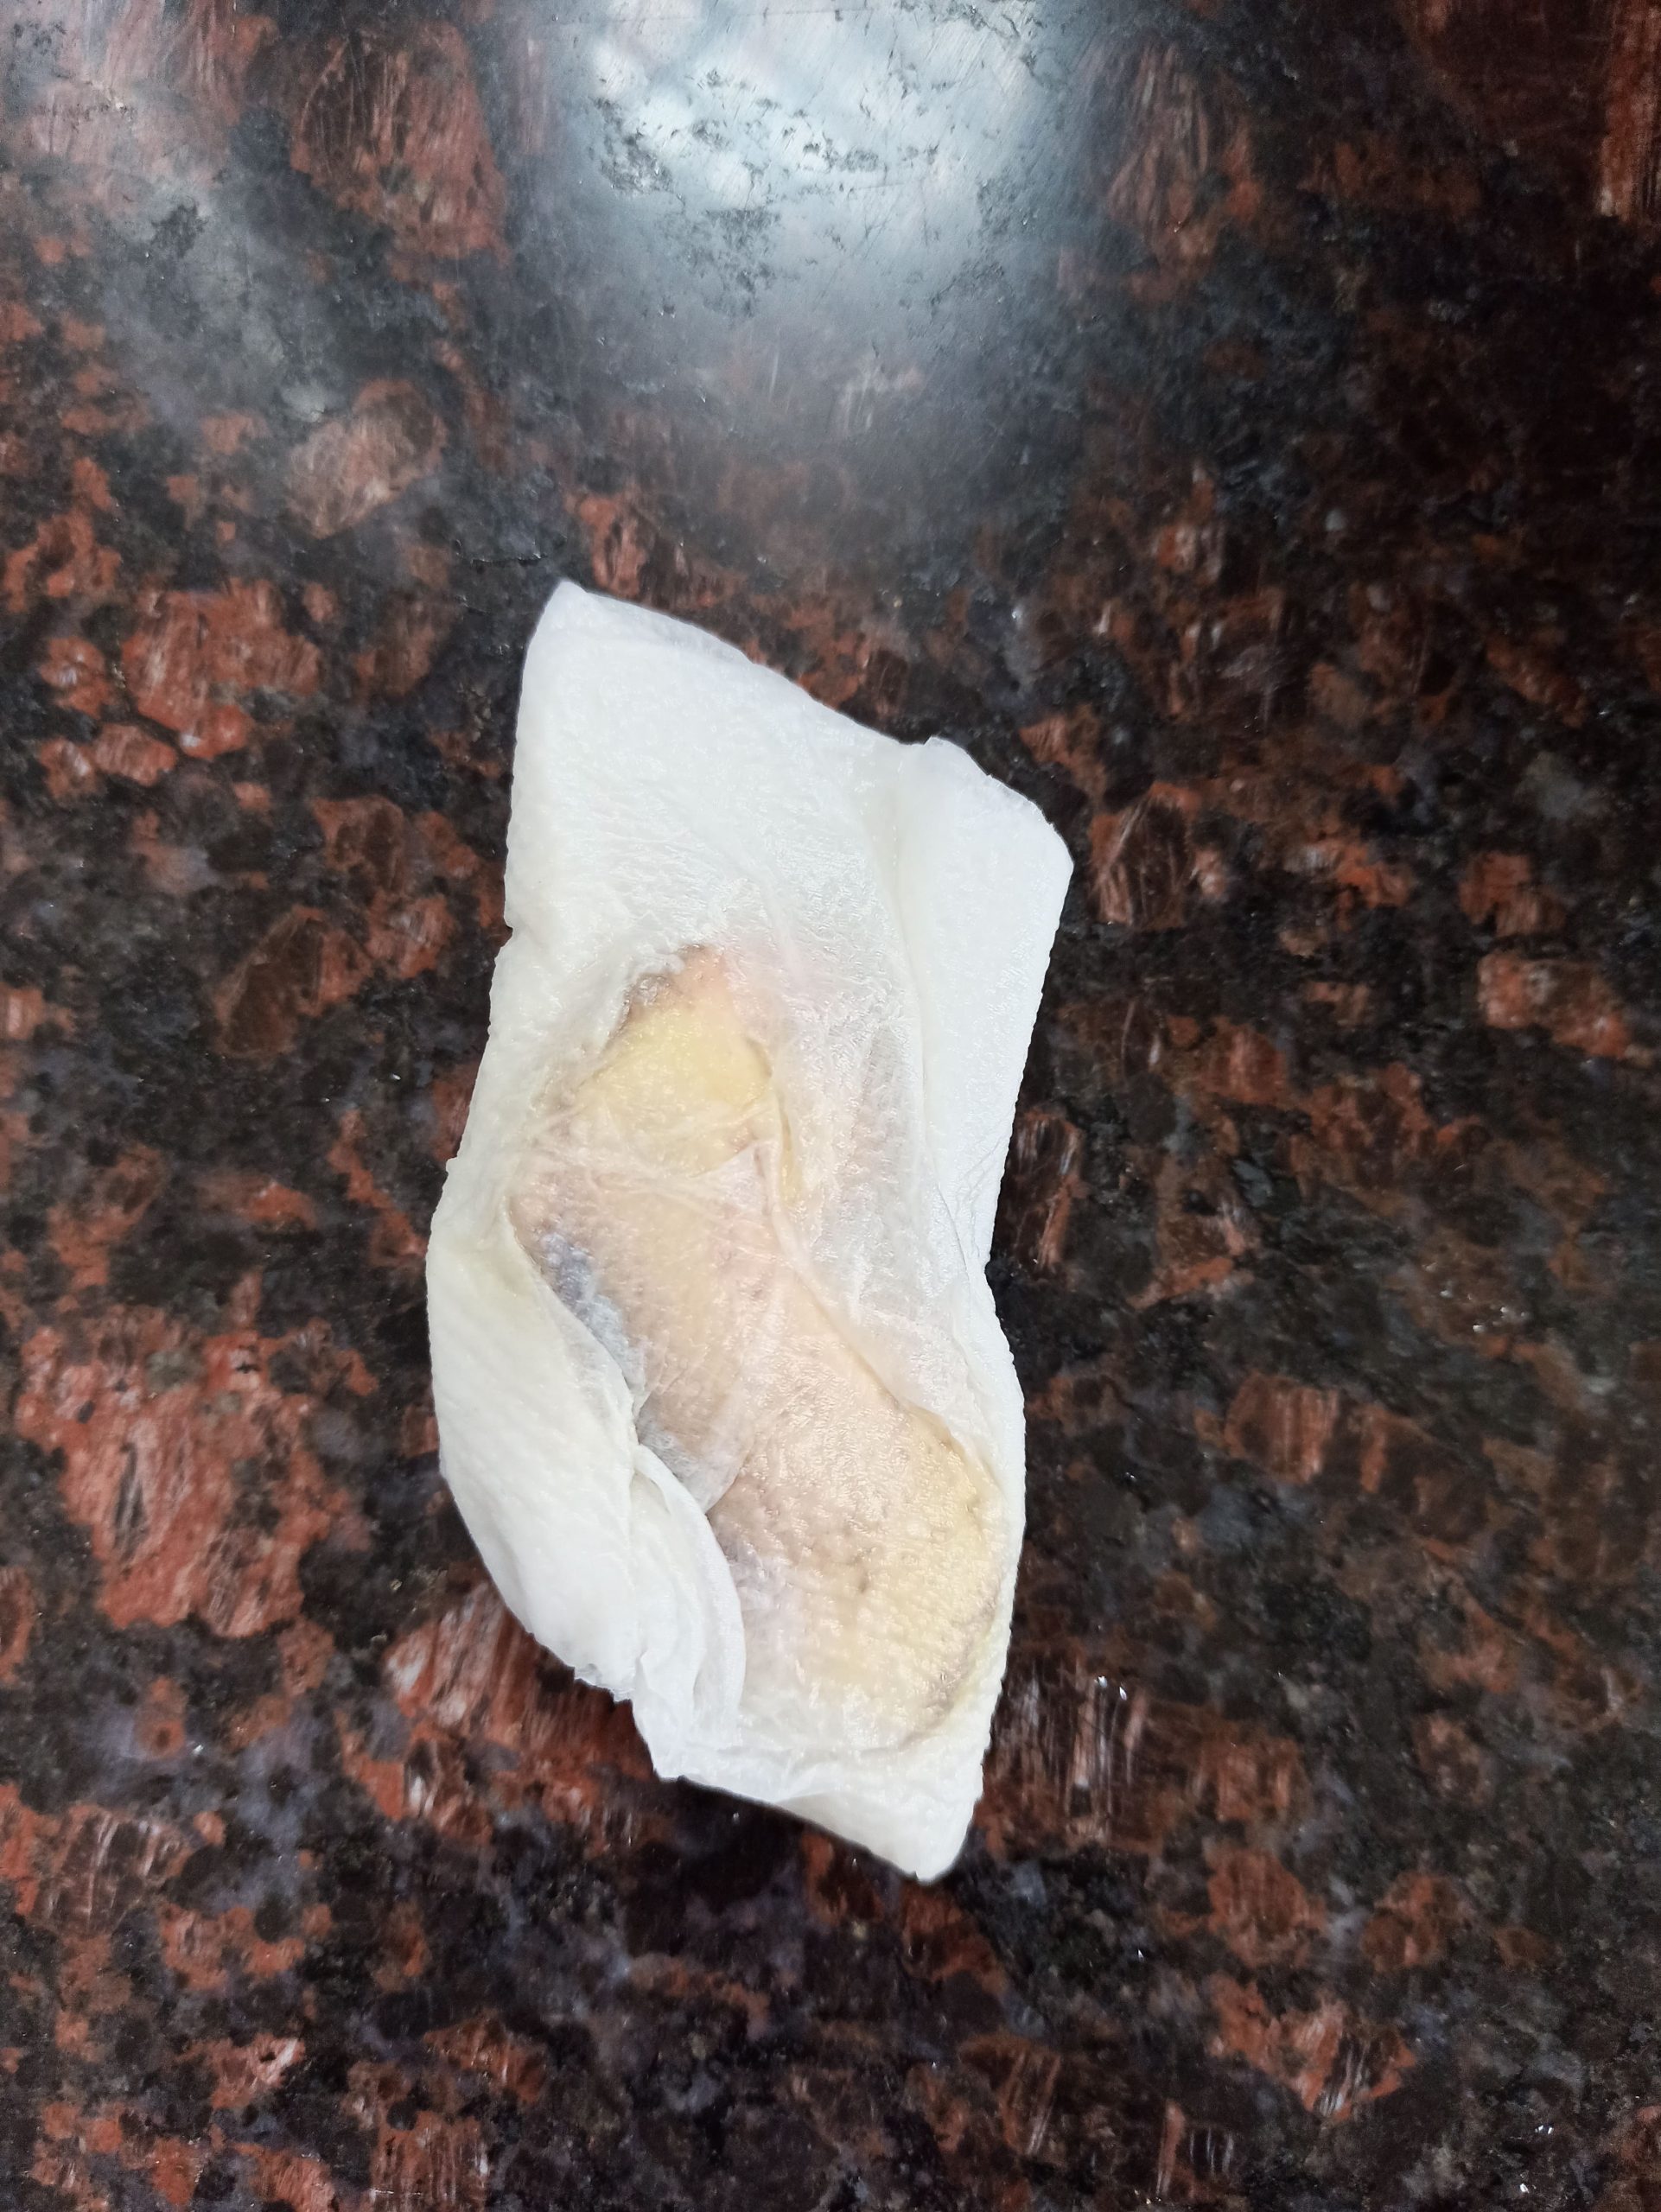 Mango Seed Wrapped in Moist Tissue Paper